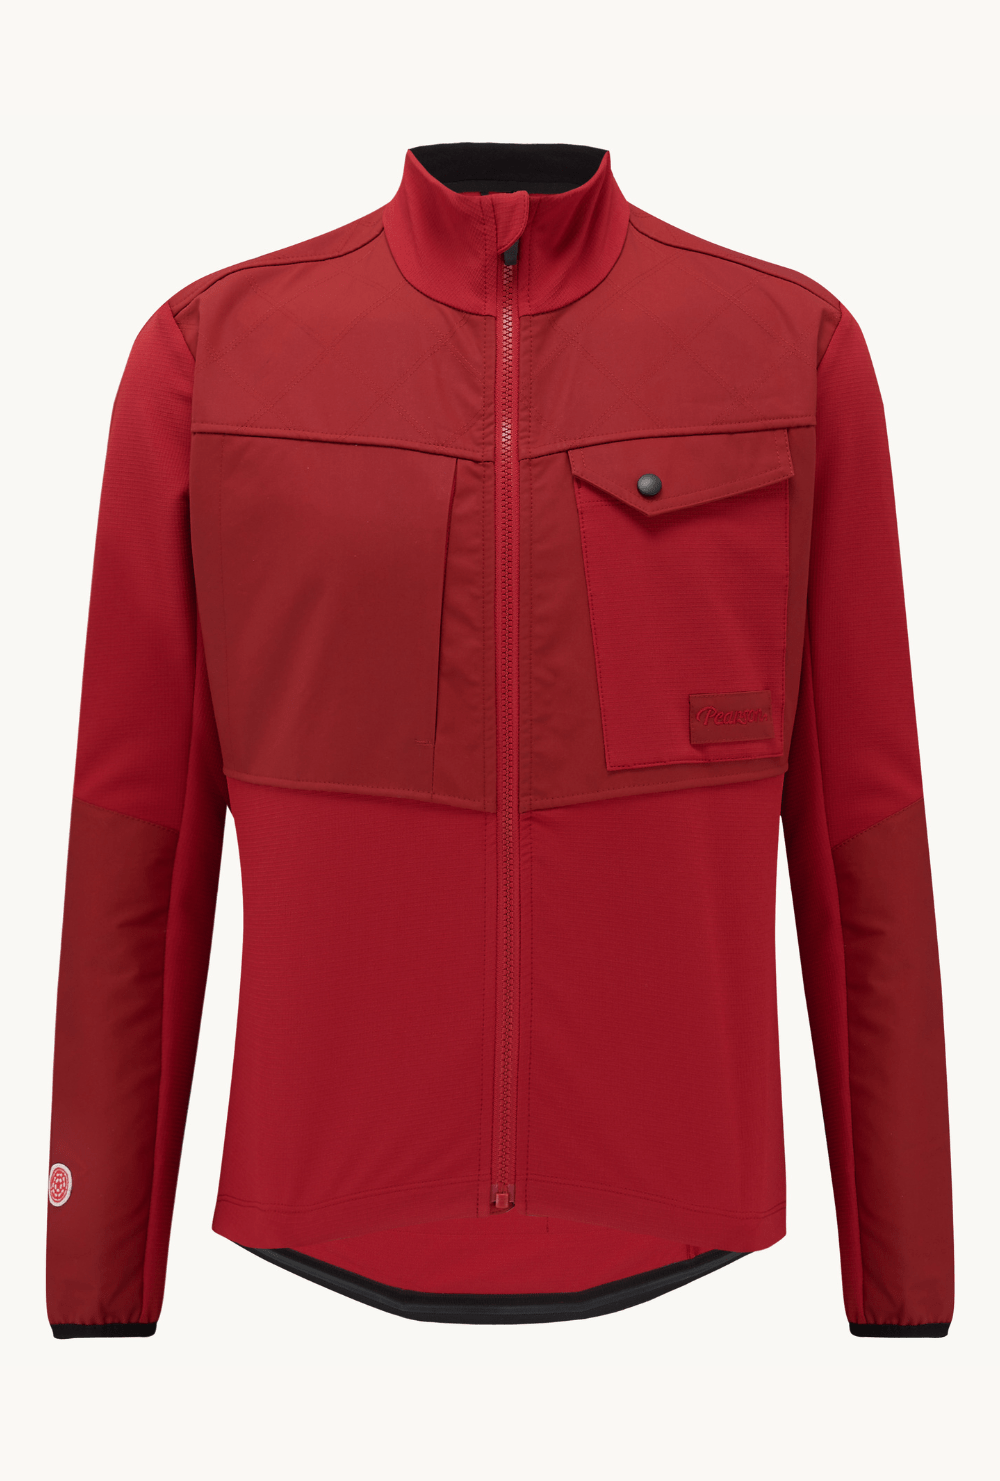 Pearson 1860  Because Its There - Red Adventure Long Sleeve Cycling Jacket  Cherry Red / Small